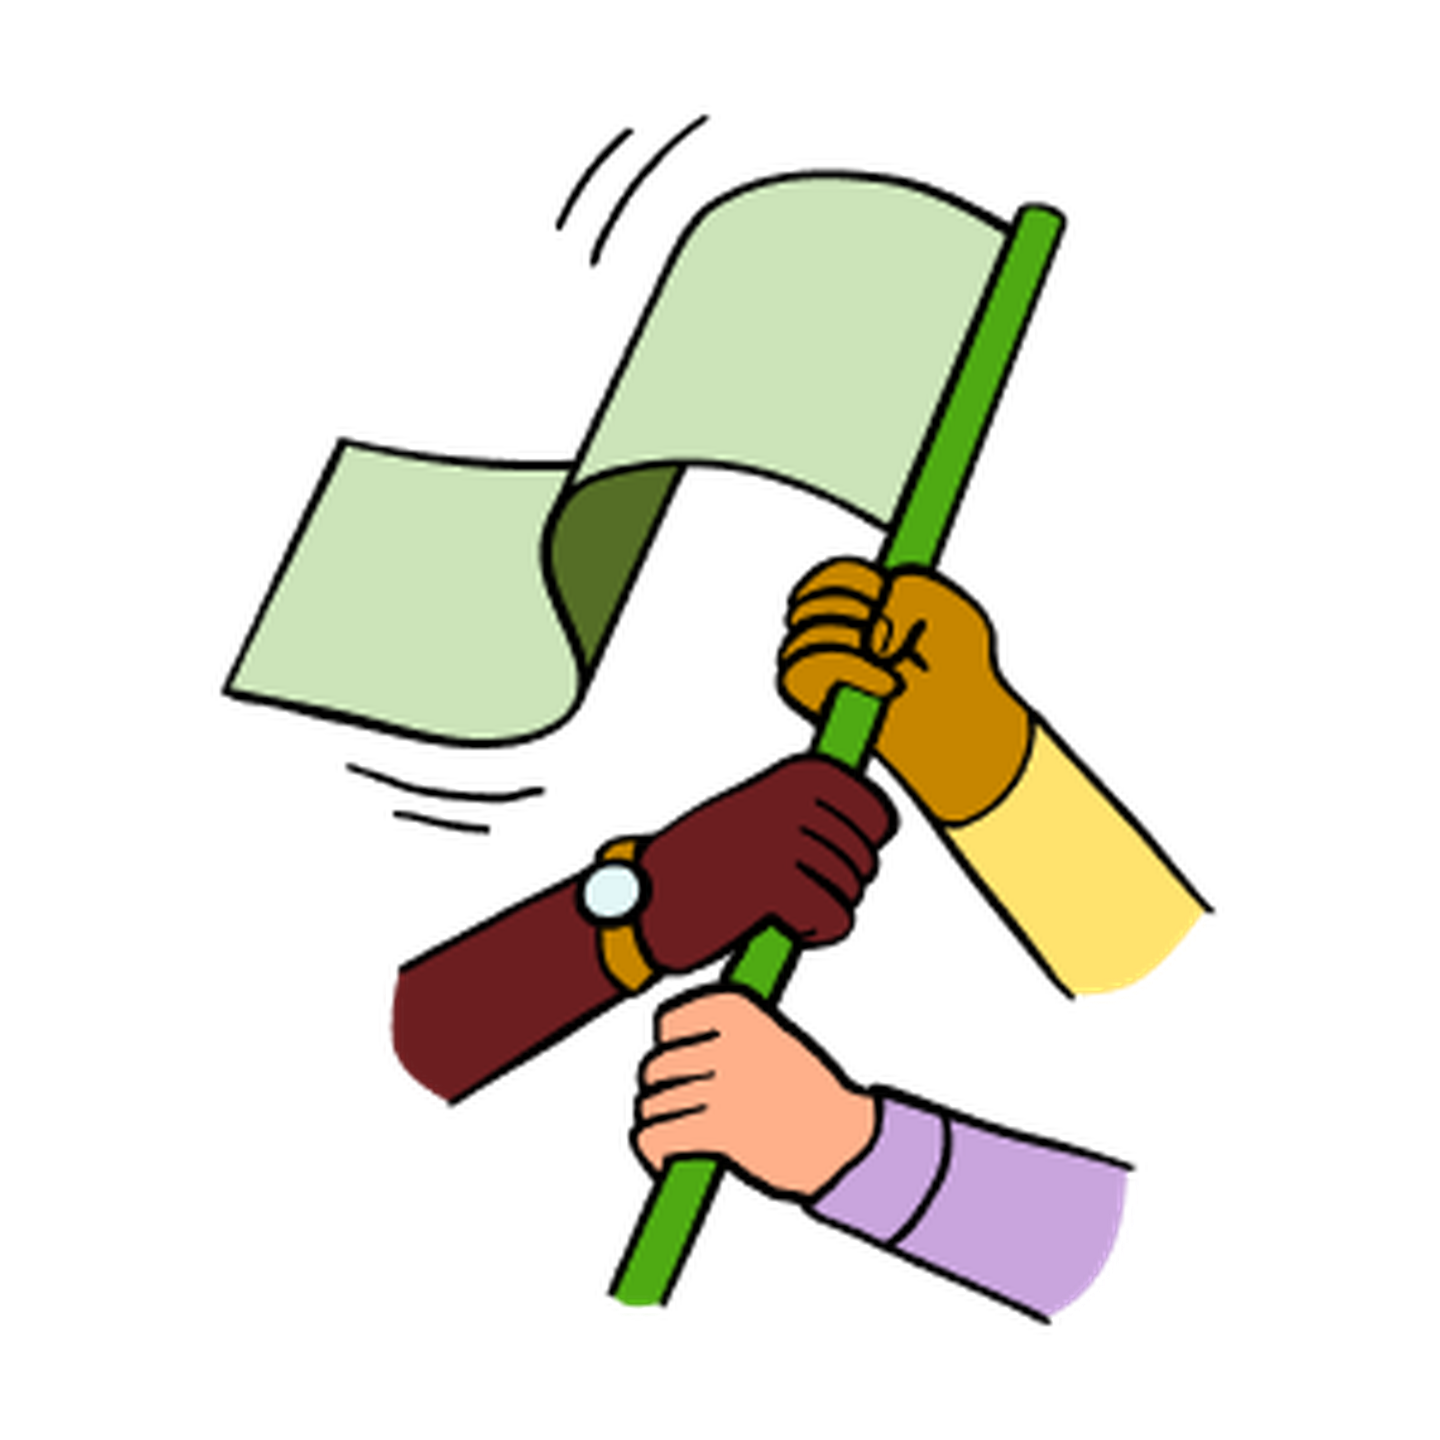 Illustration of three people holding a green flag